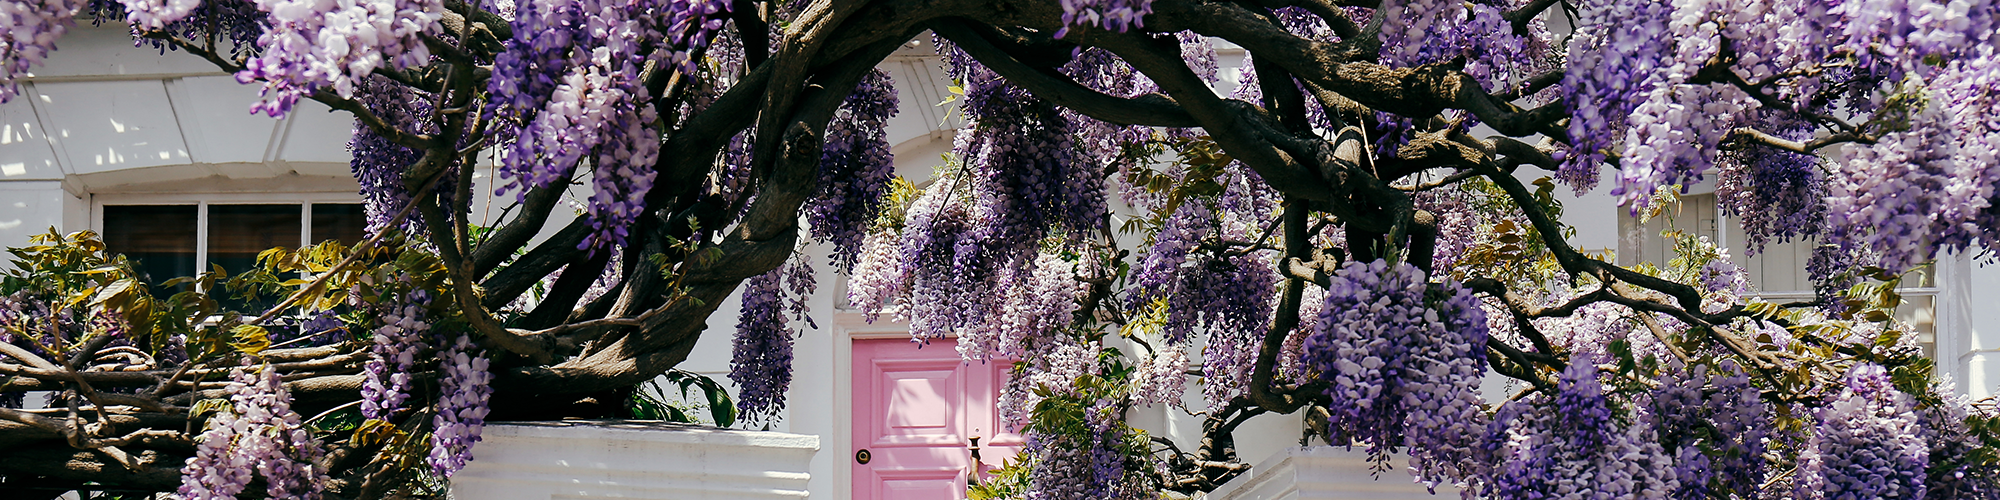 Blooming wisteria grows up a whitewashed townhouse with a pink door. SAM Conveyancing answers: Can Wisteria Cause Subsidence? And how to manage wisteria near your property